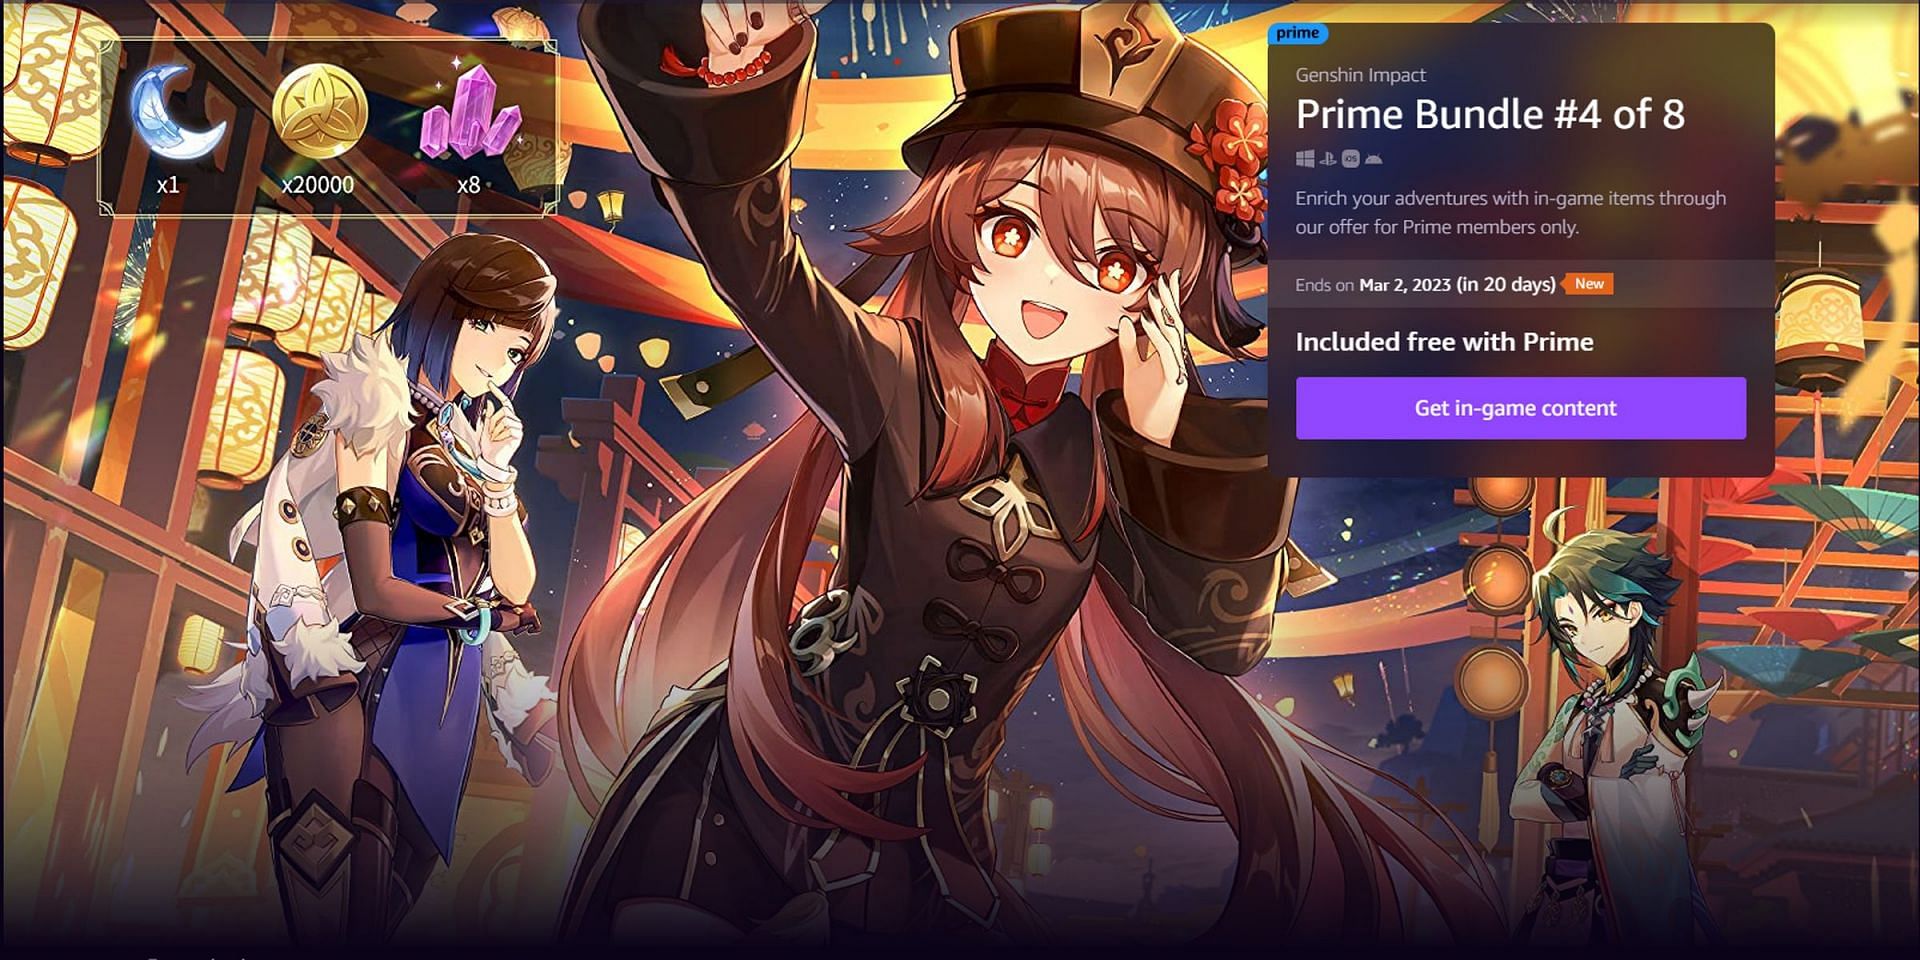 Prime Gaming is now offering loot for Genshin Impact